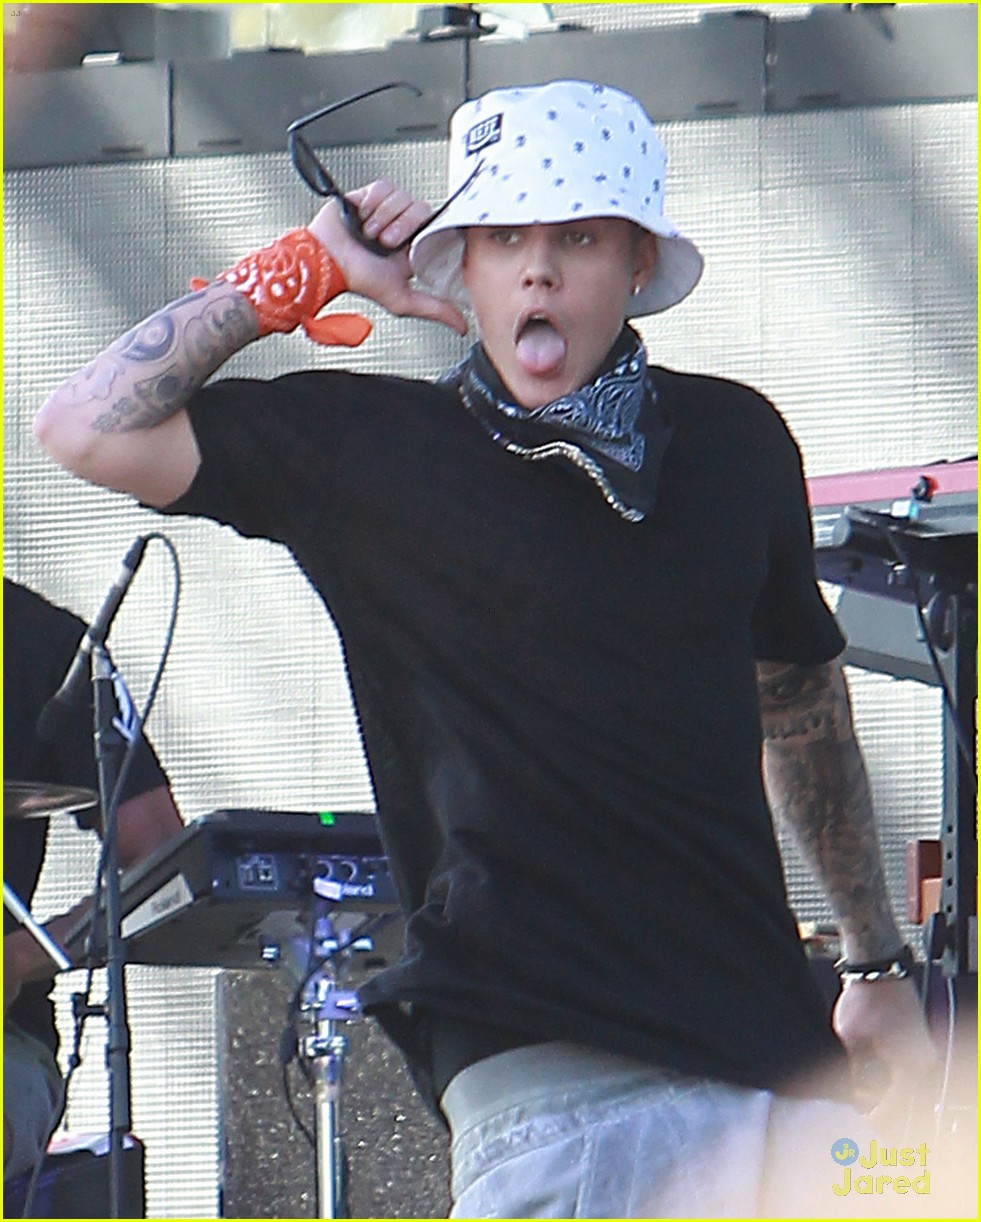 Justin Bieber Makes Surprise Appearance at Coachella, Performs ...